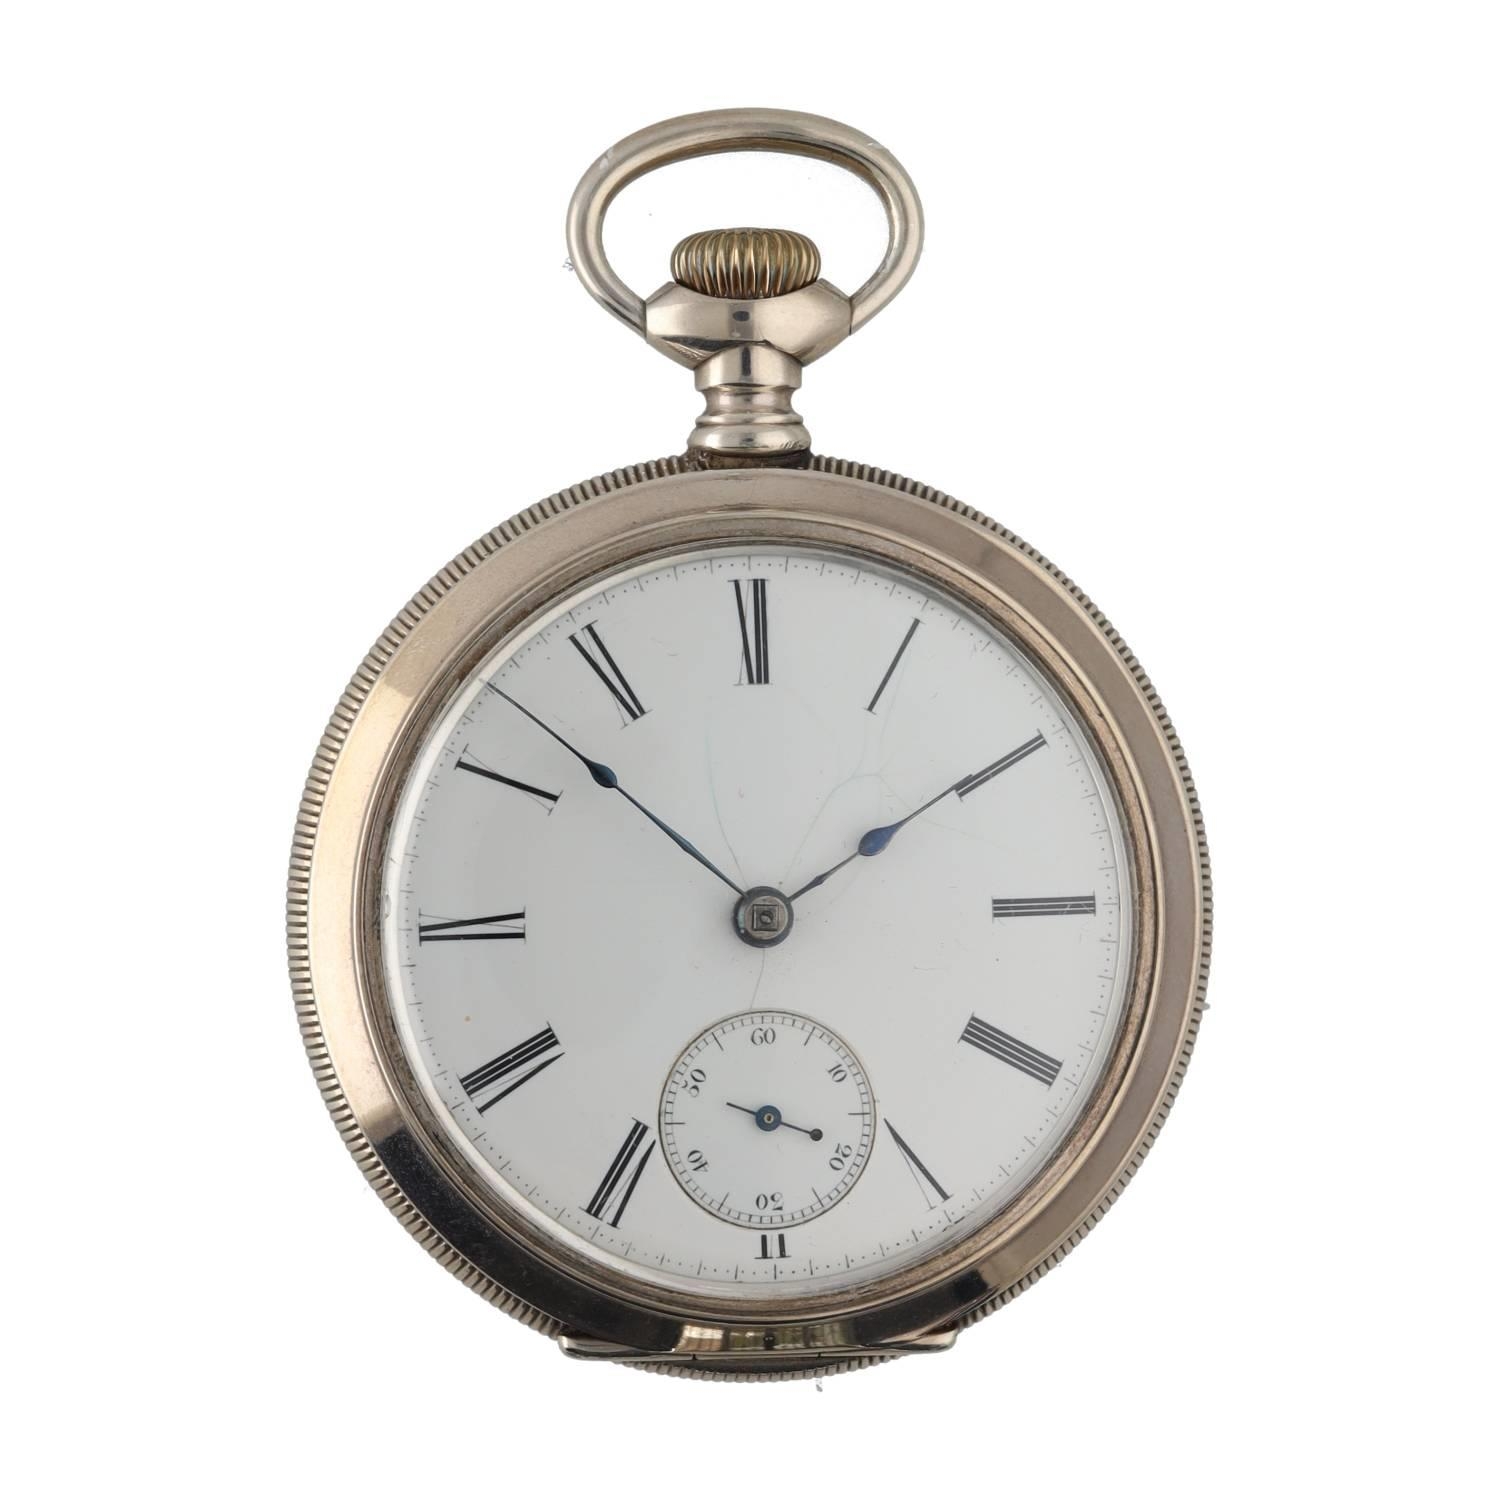 J. W. Benedict, New York fusee lever pocket watch, the movement signed J.W. Benedict, 5 Wall St. New - Bild 2 aus 4